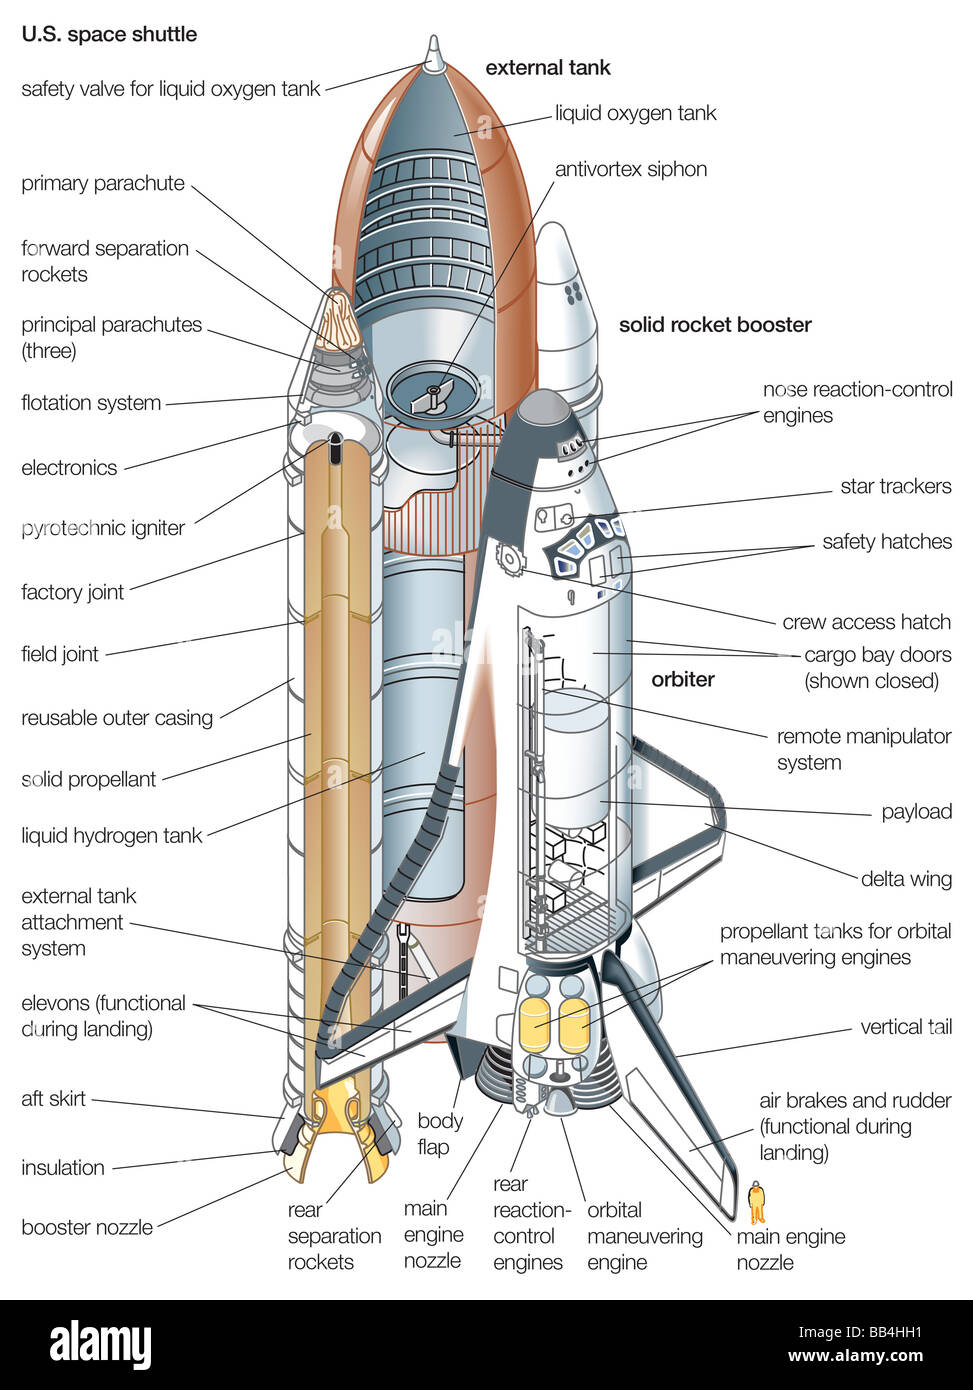 U.S. space shuttle, composed of a winged orbiter, an external liquid-propellant tank, and two solid-fuel rocket boosters. Stock Photo